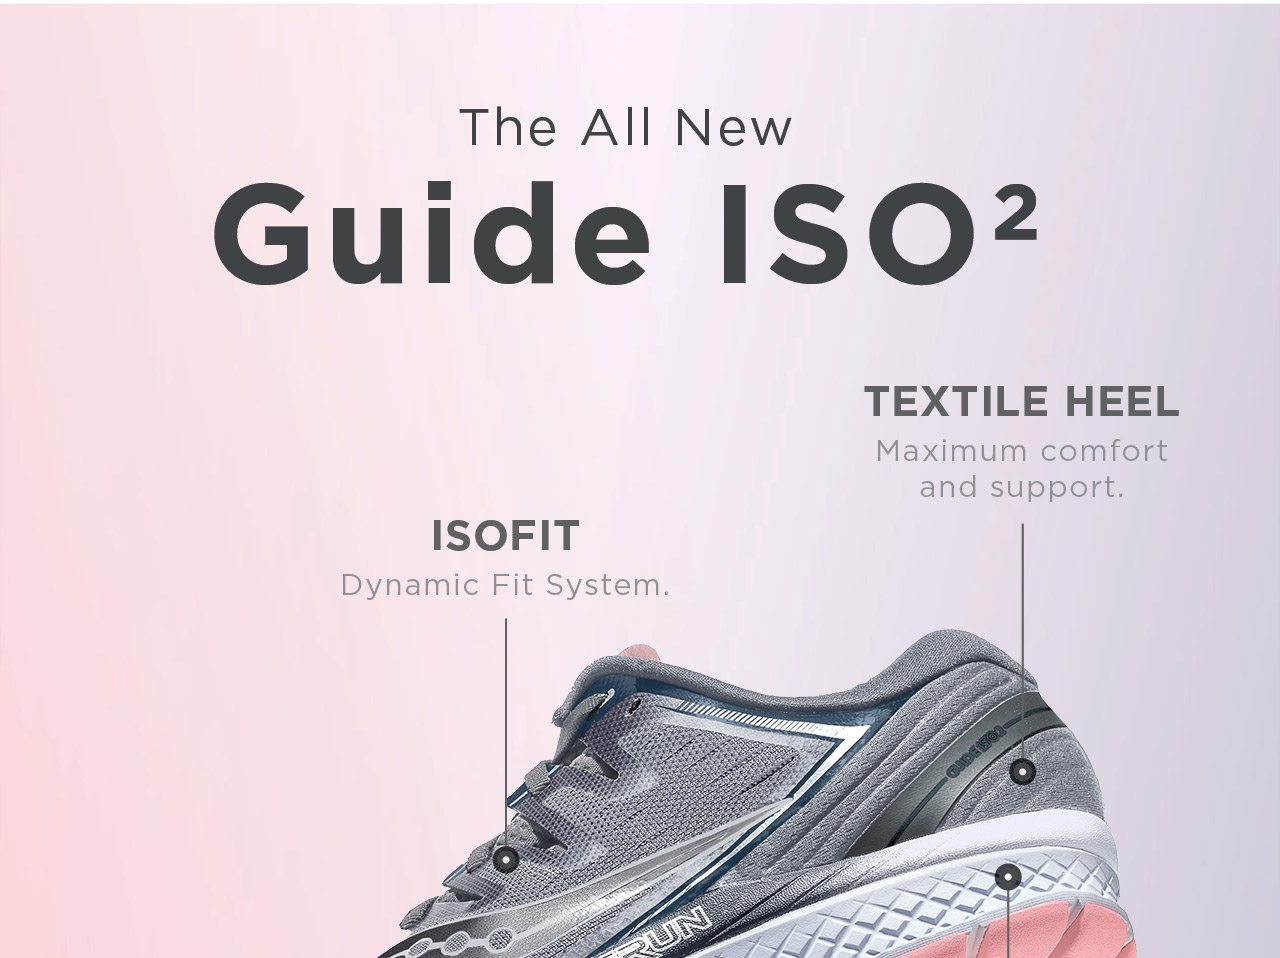 Just Dropped ⚫ All New Guide ISO 2 